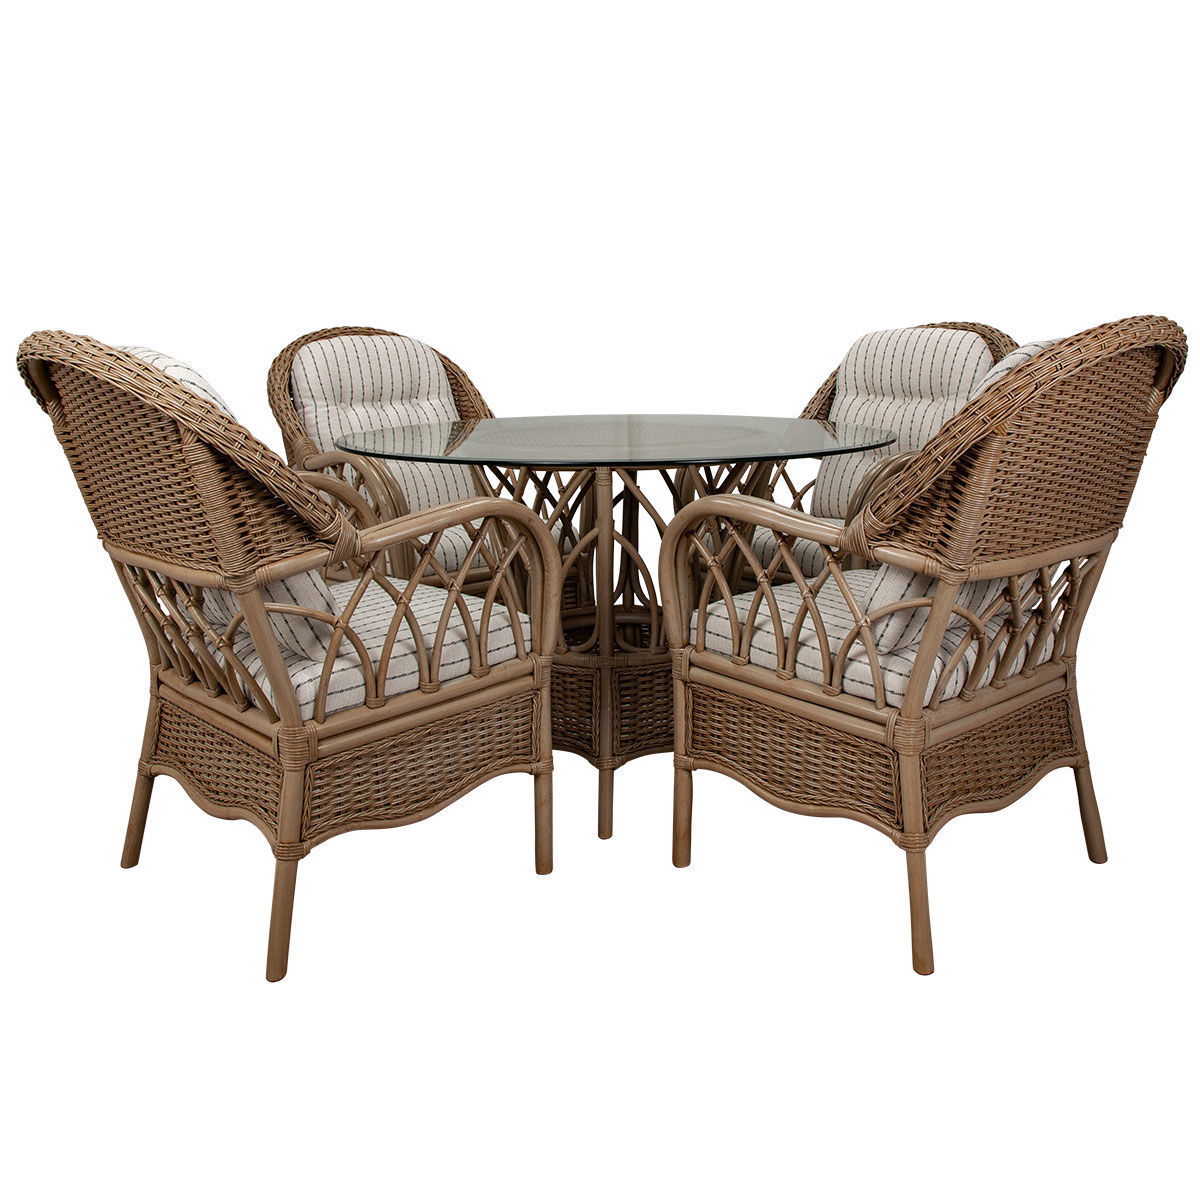 Picture of Everglade Dining Room Set